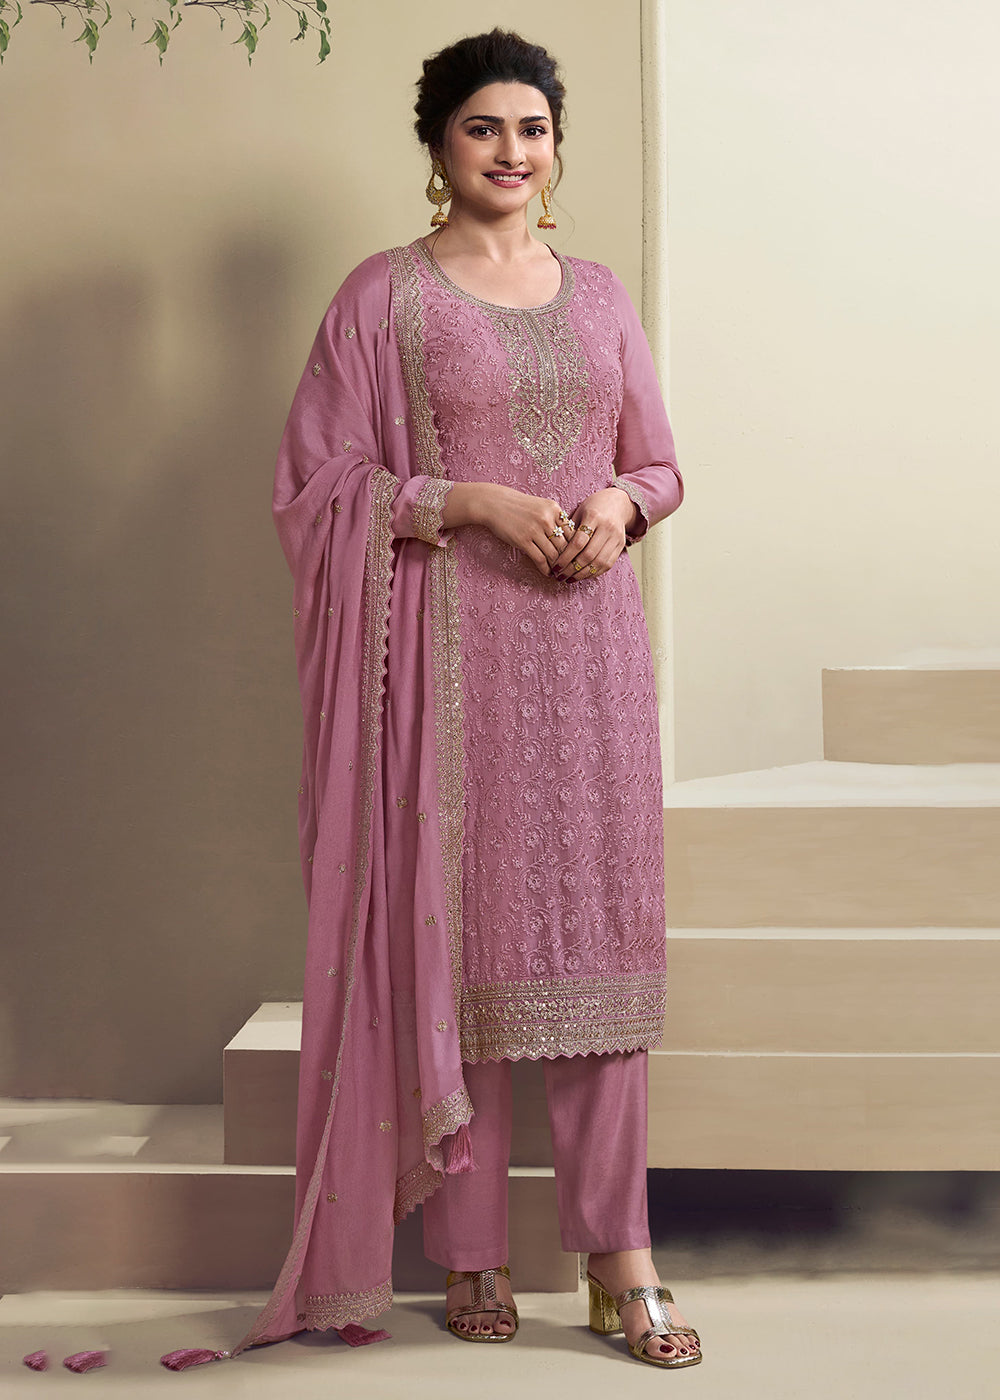 Buy Now Dusty Pink Schiffli Embroidered Organza Salwar Suit Online in USA, UK, Canada, Germany, Australia & Worldwide at Empress Clothing